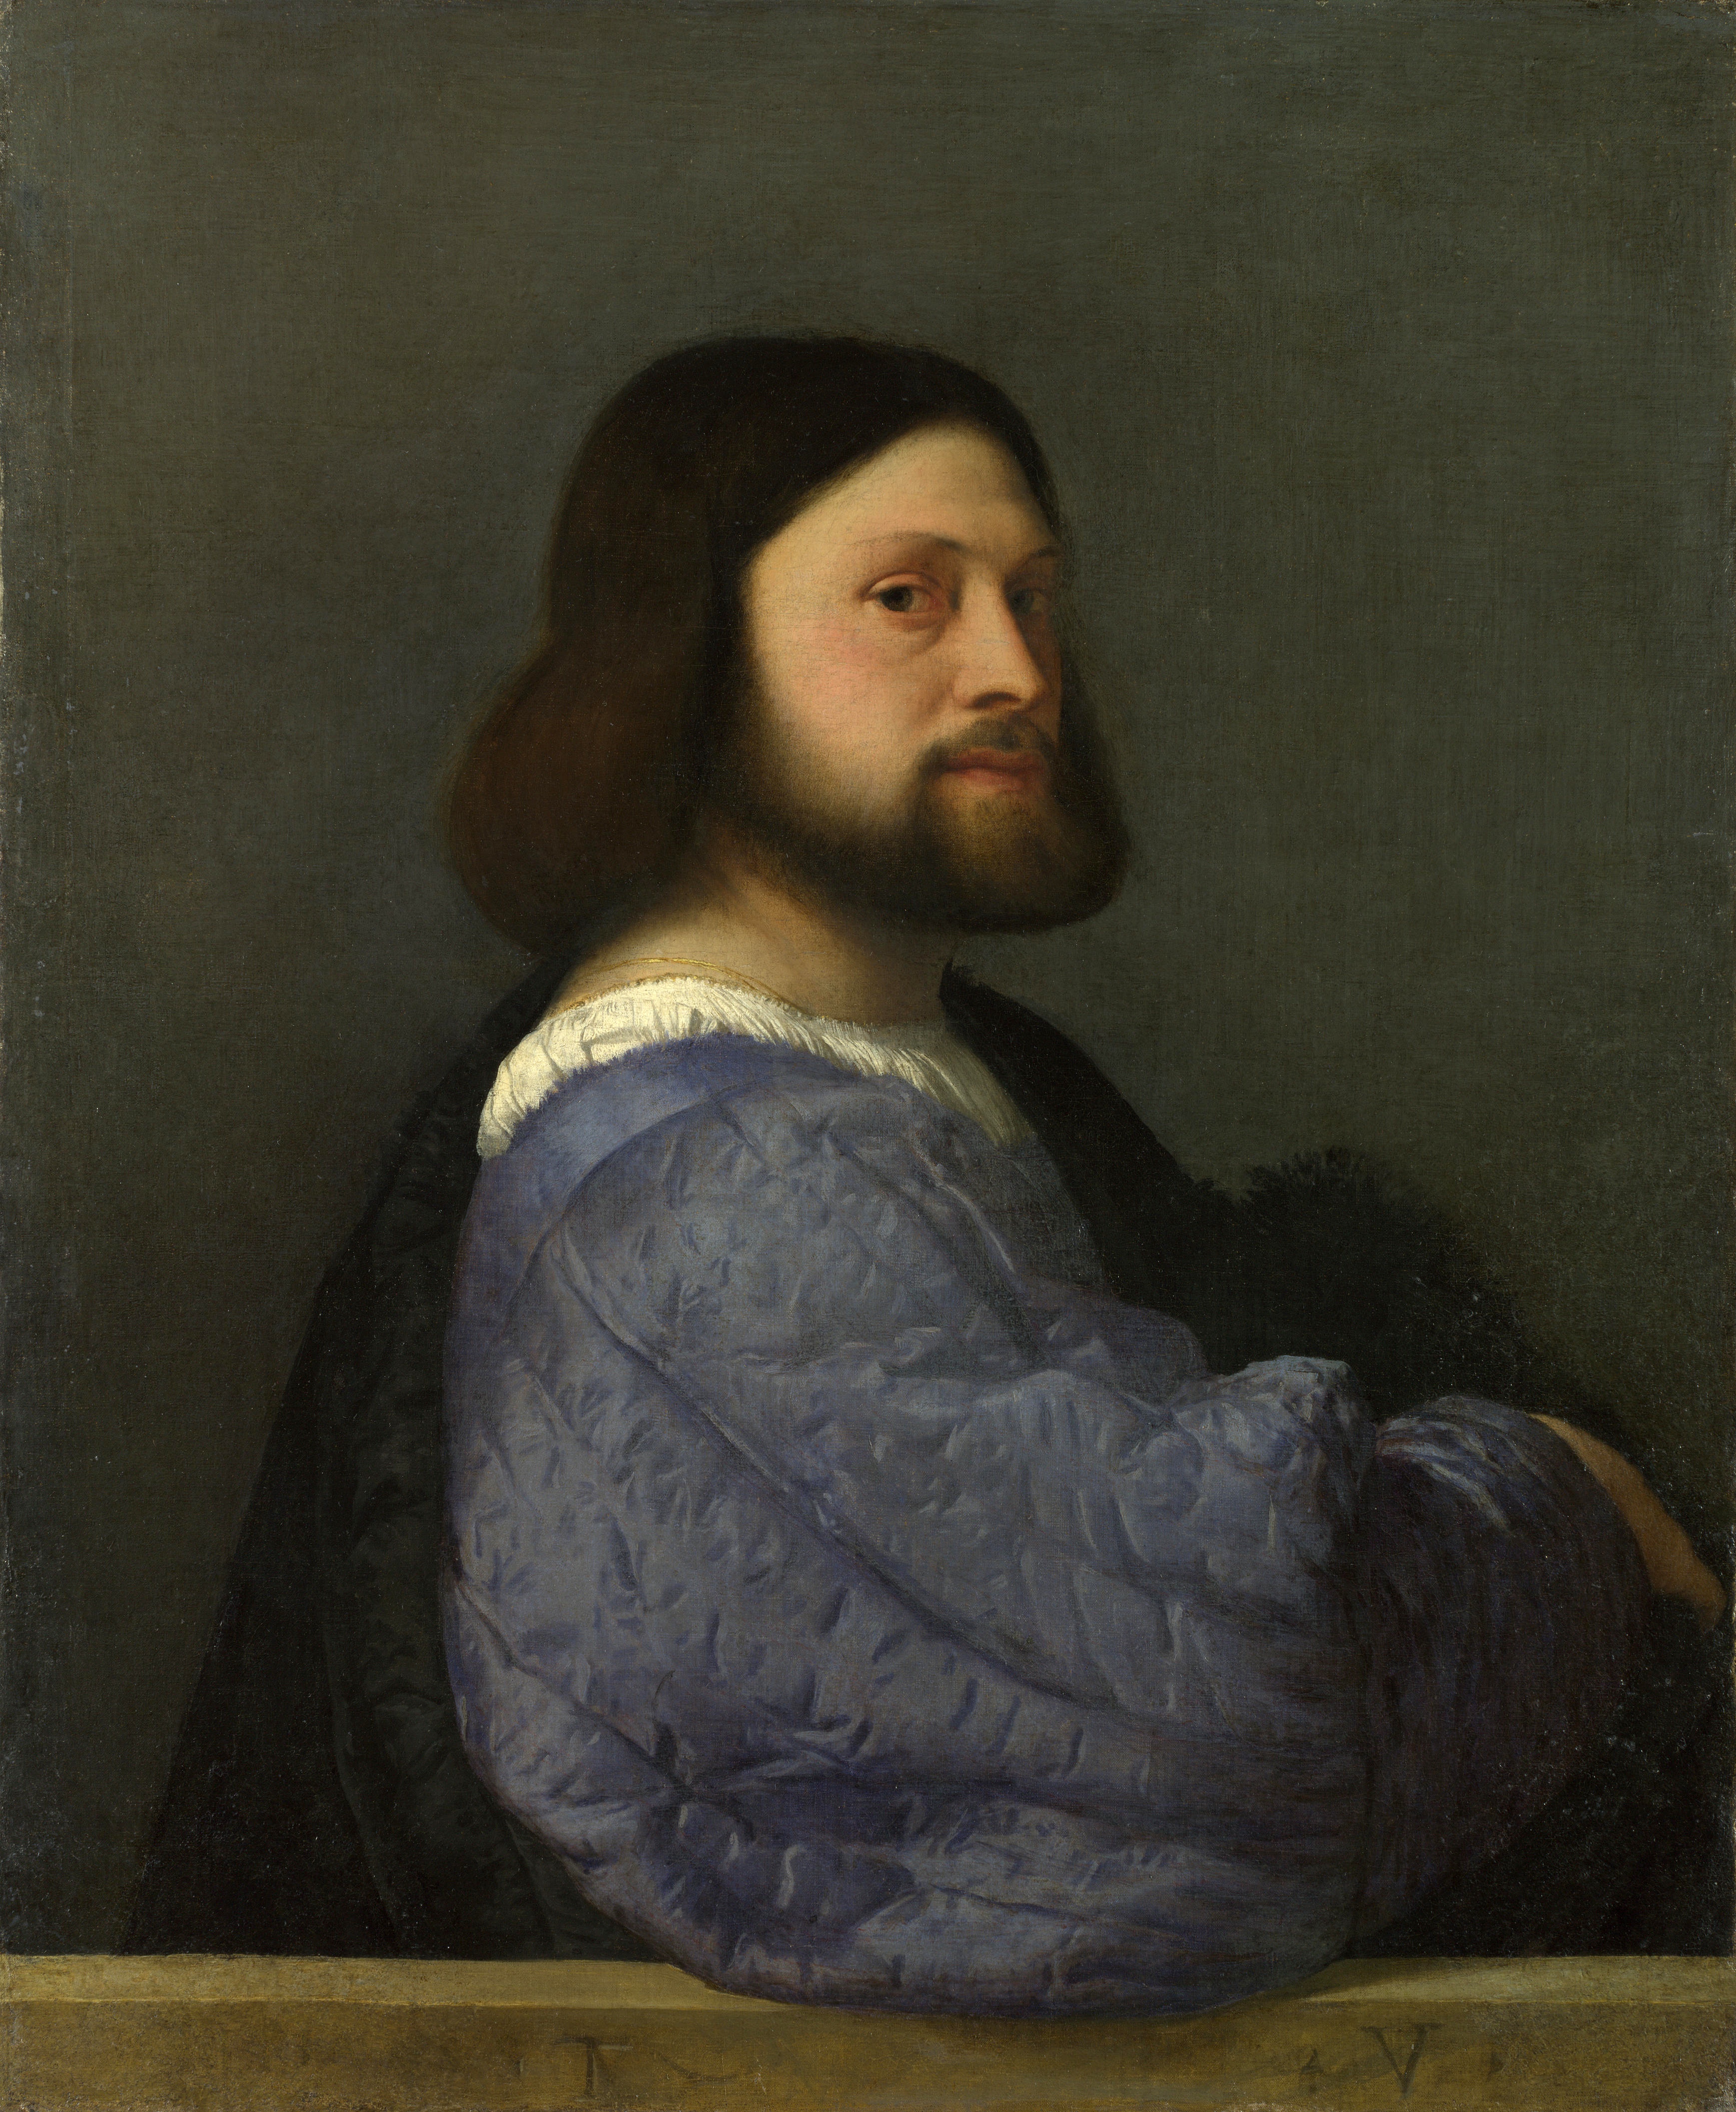 Titian_-_Portrait_of_a_man_with_a_quilted_sleeve.jpg